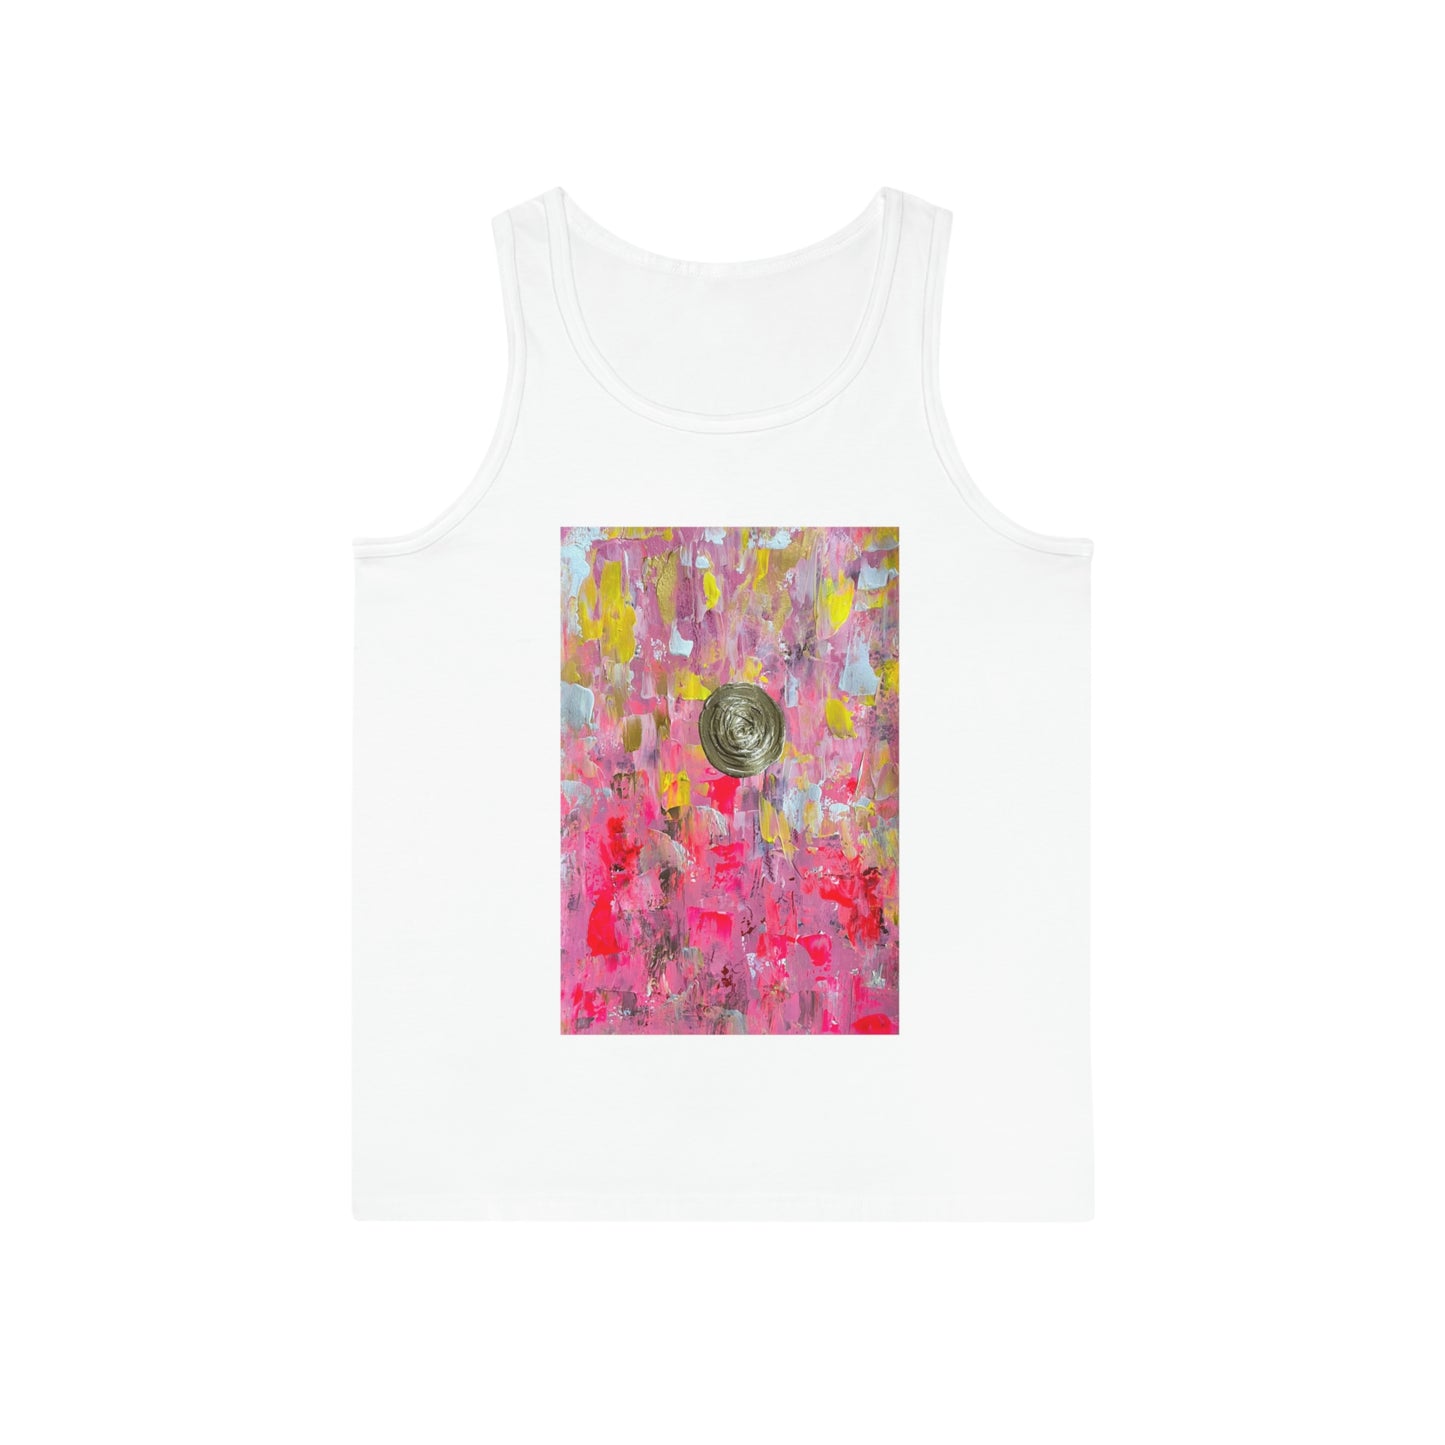 "Clear Vision" Unisex Softstyle Tank Top